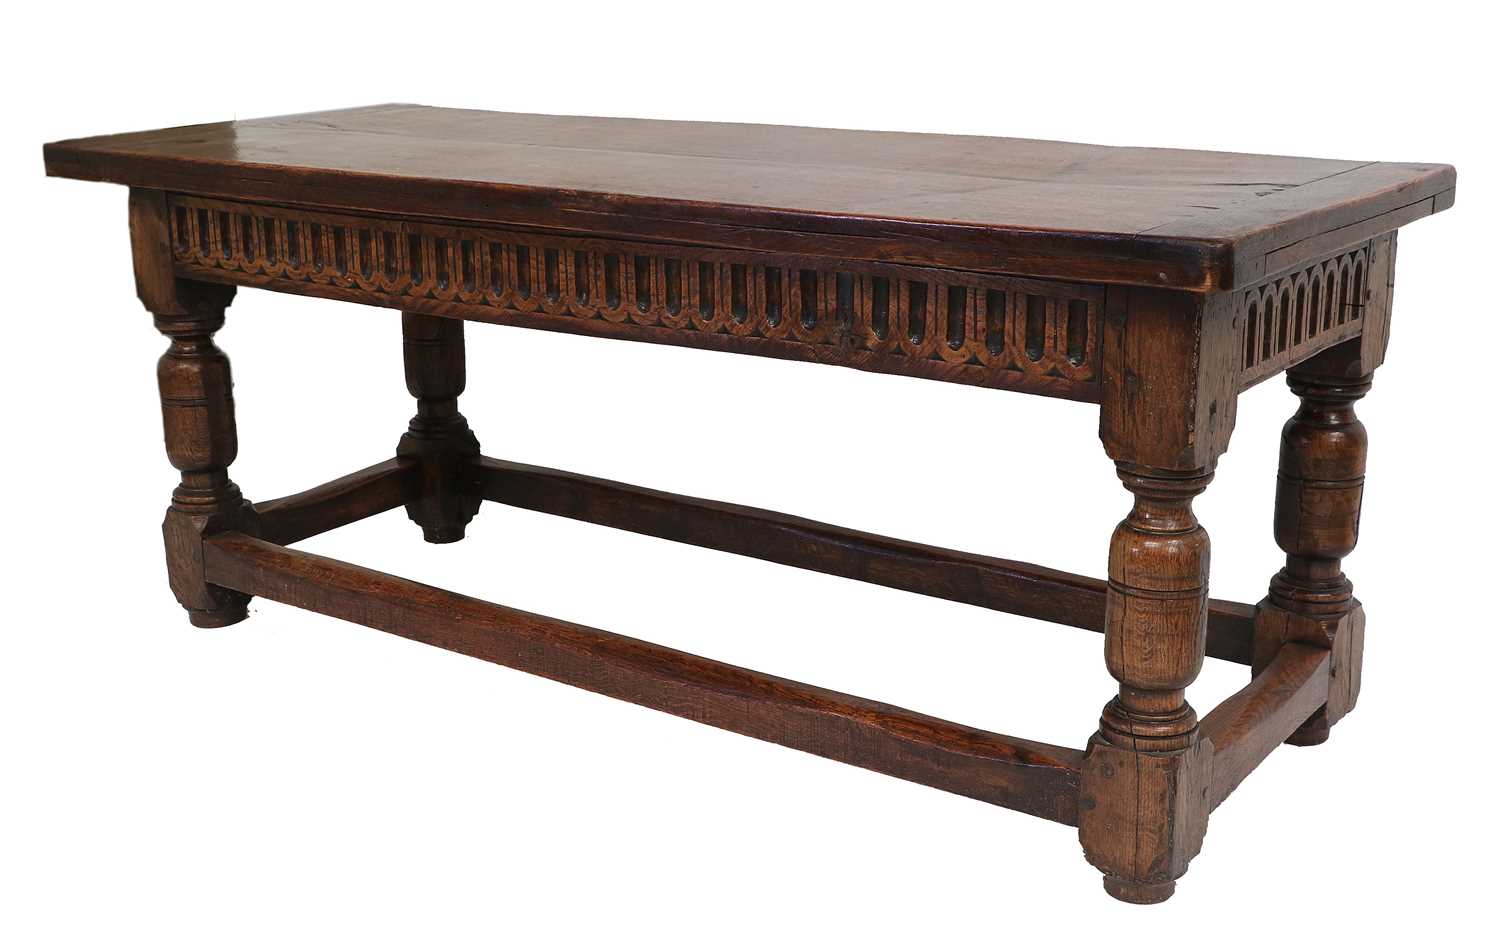 An Early 18th Century Joined Oak Refectory Dining Table, of two-plank construction with cleated ends